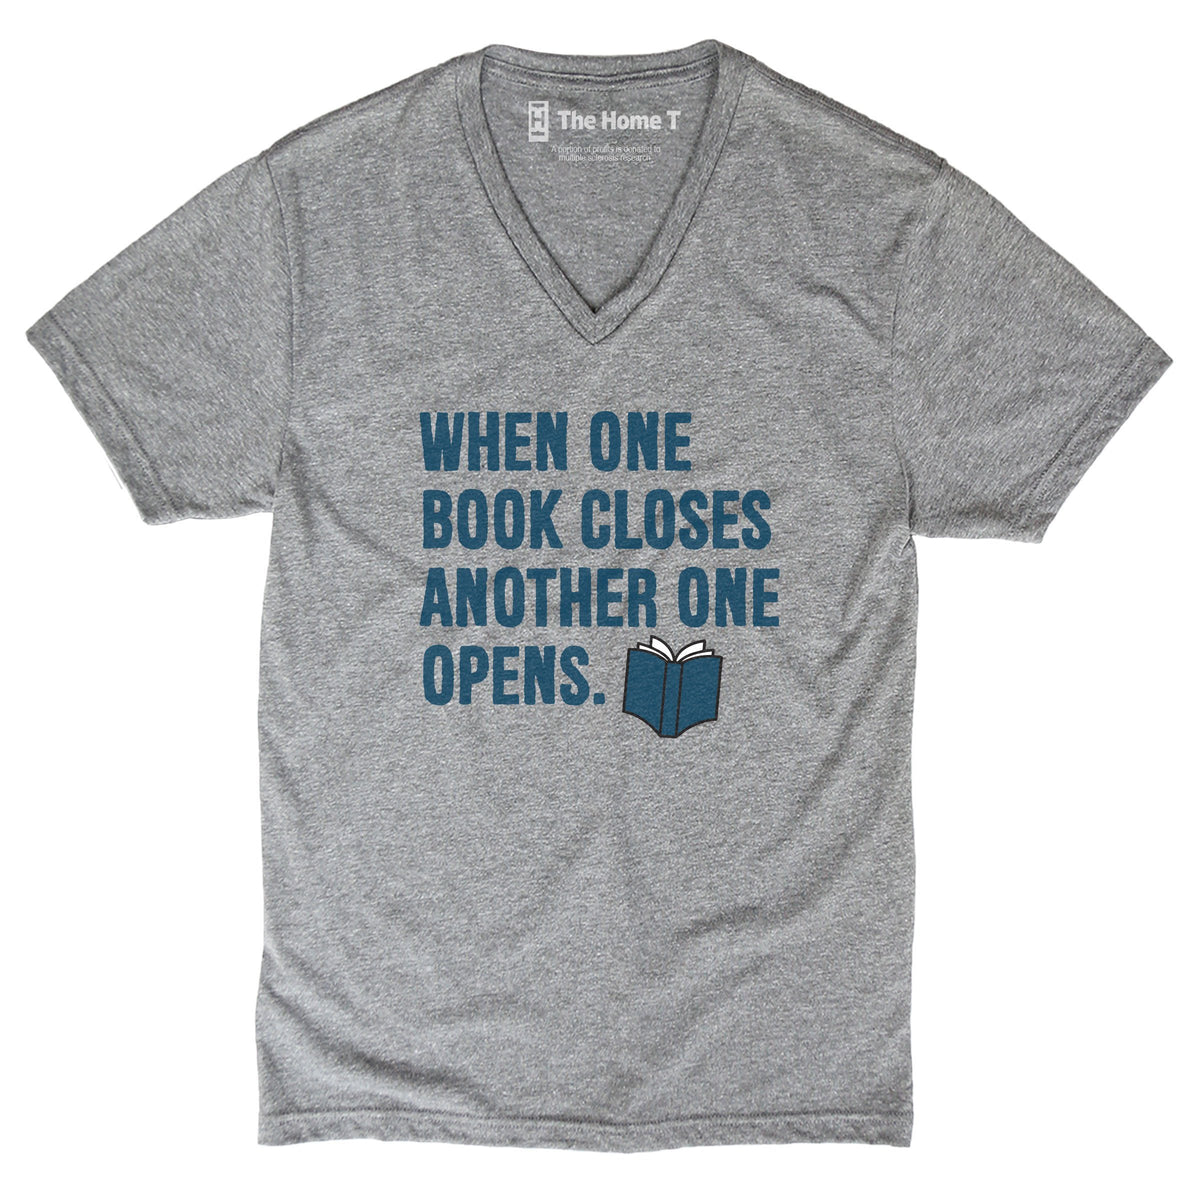 One Book Closes The Home T XS V-NECK